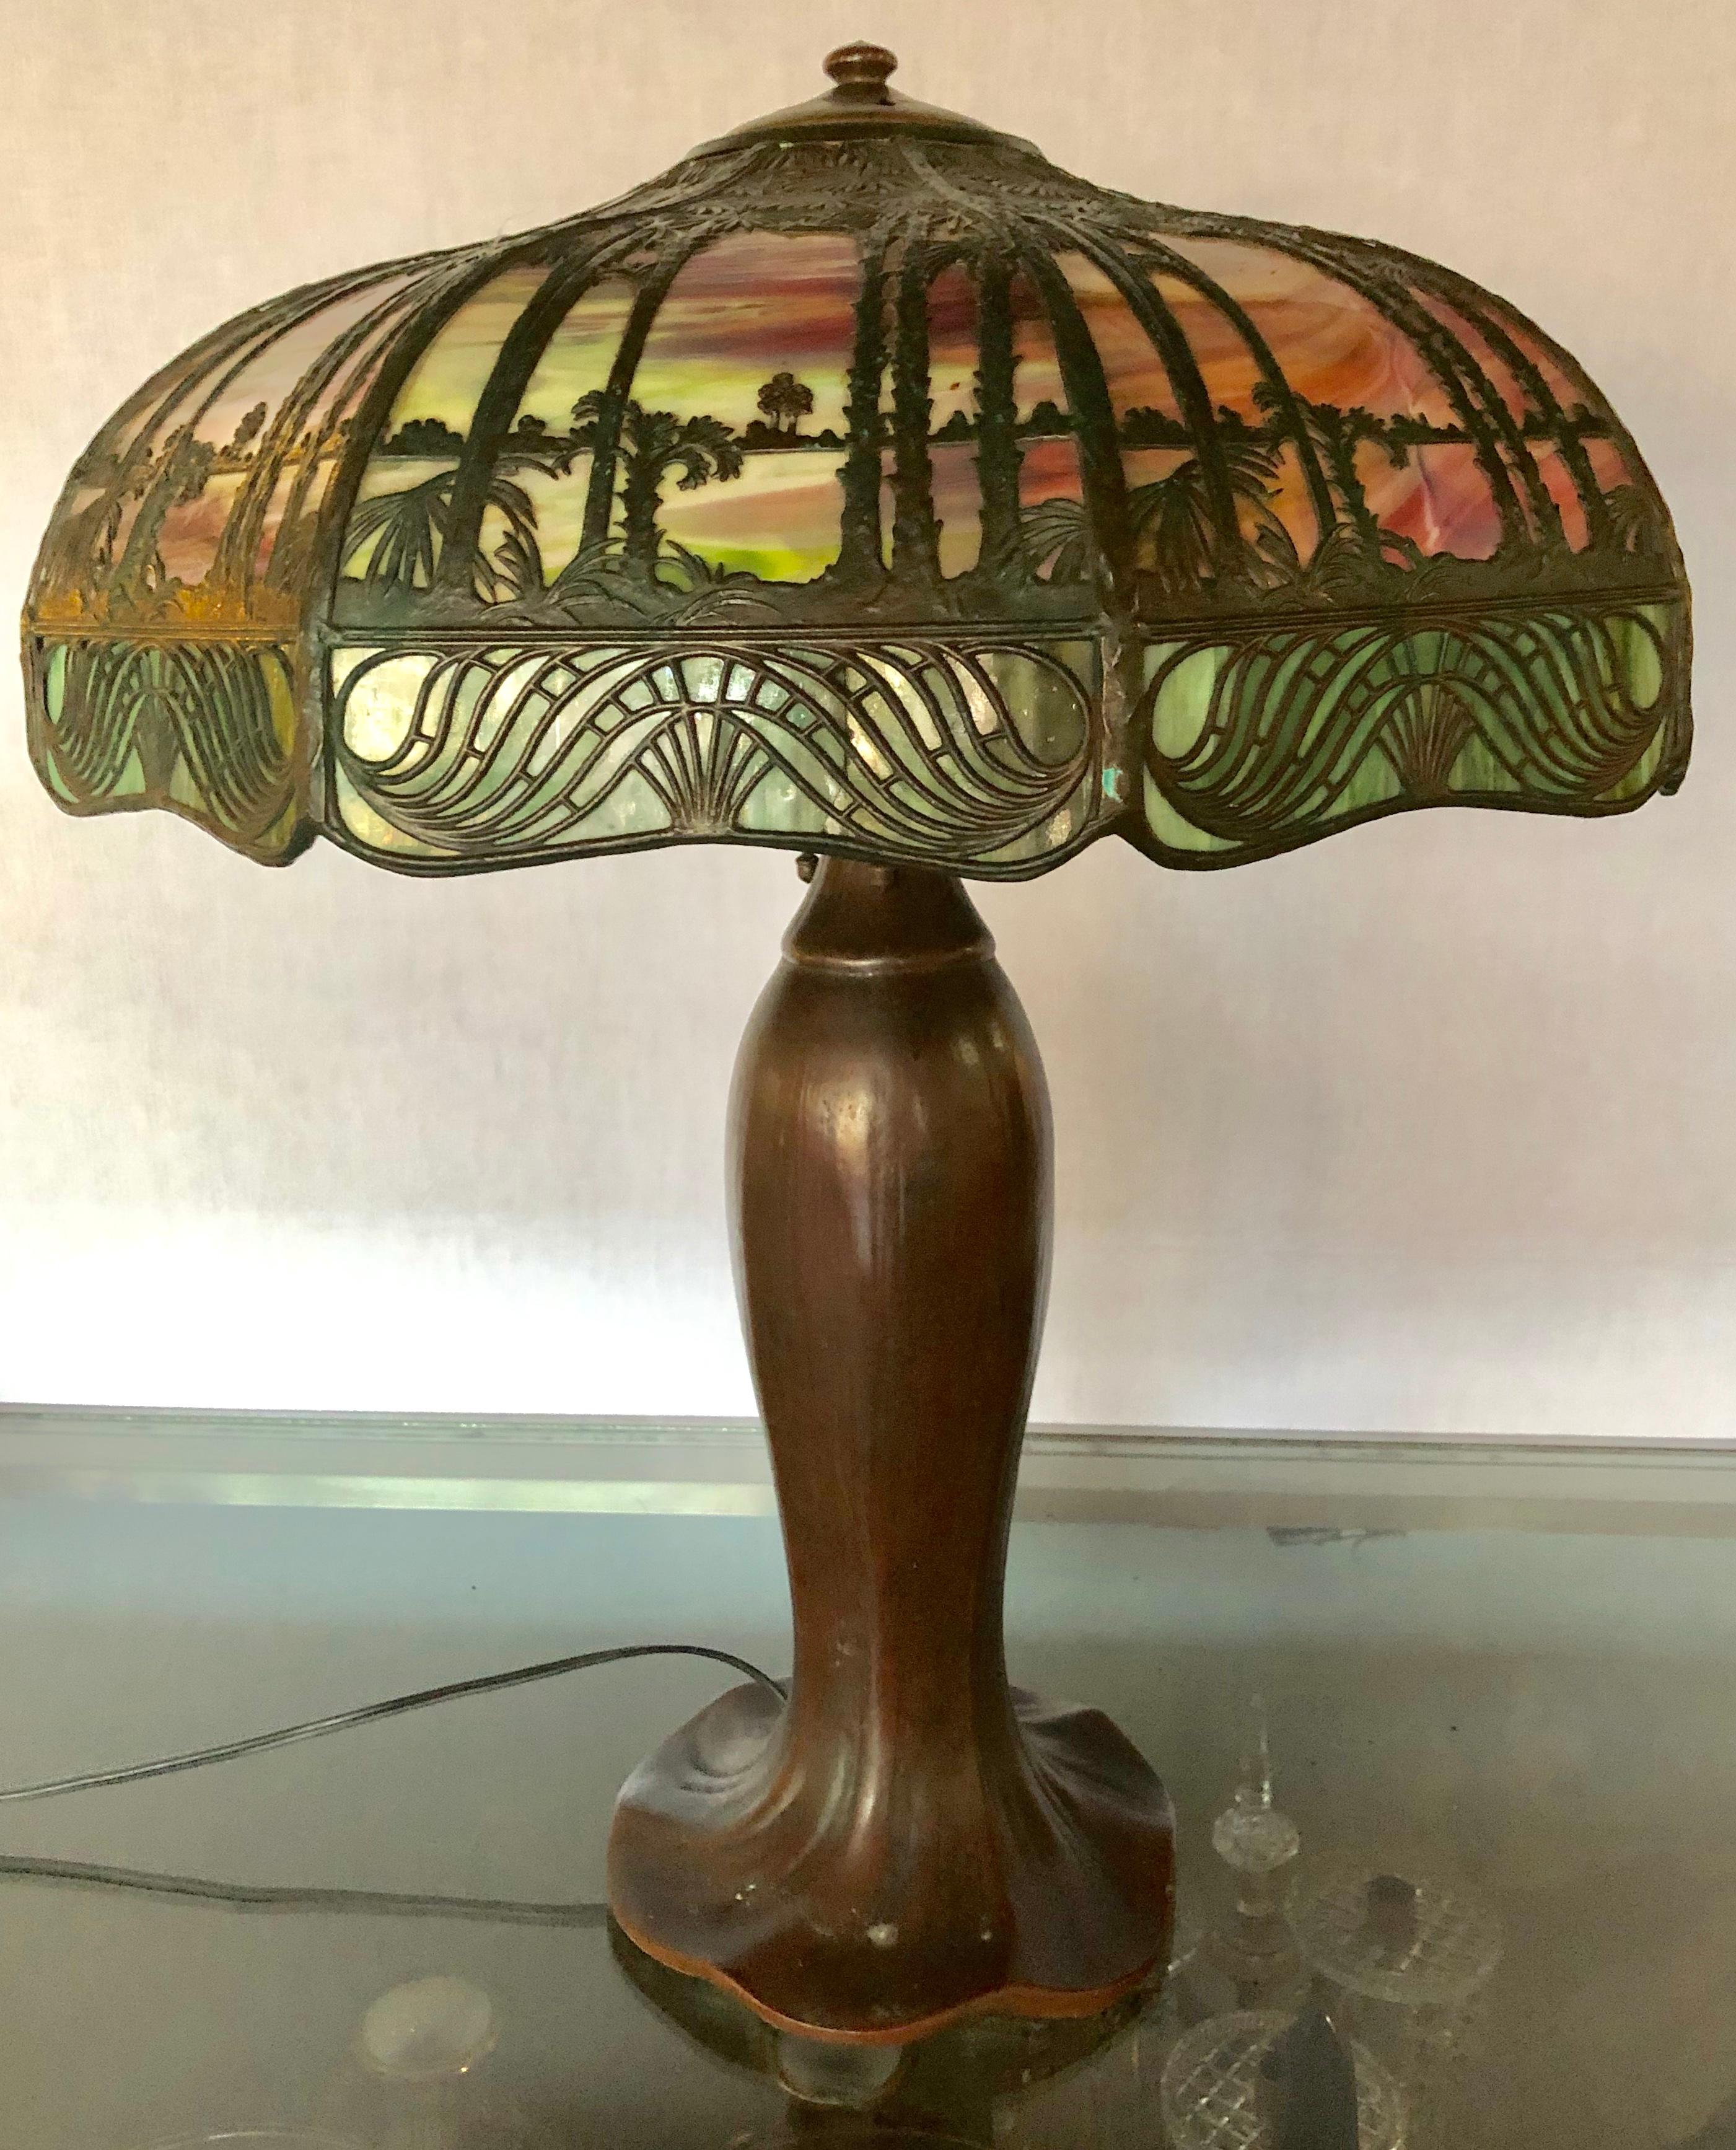 Handel palm tree table lamp signed on base and shade Art & Crafts.

The shade measures 7.5